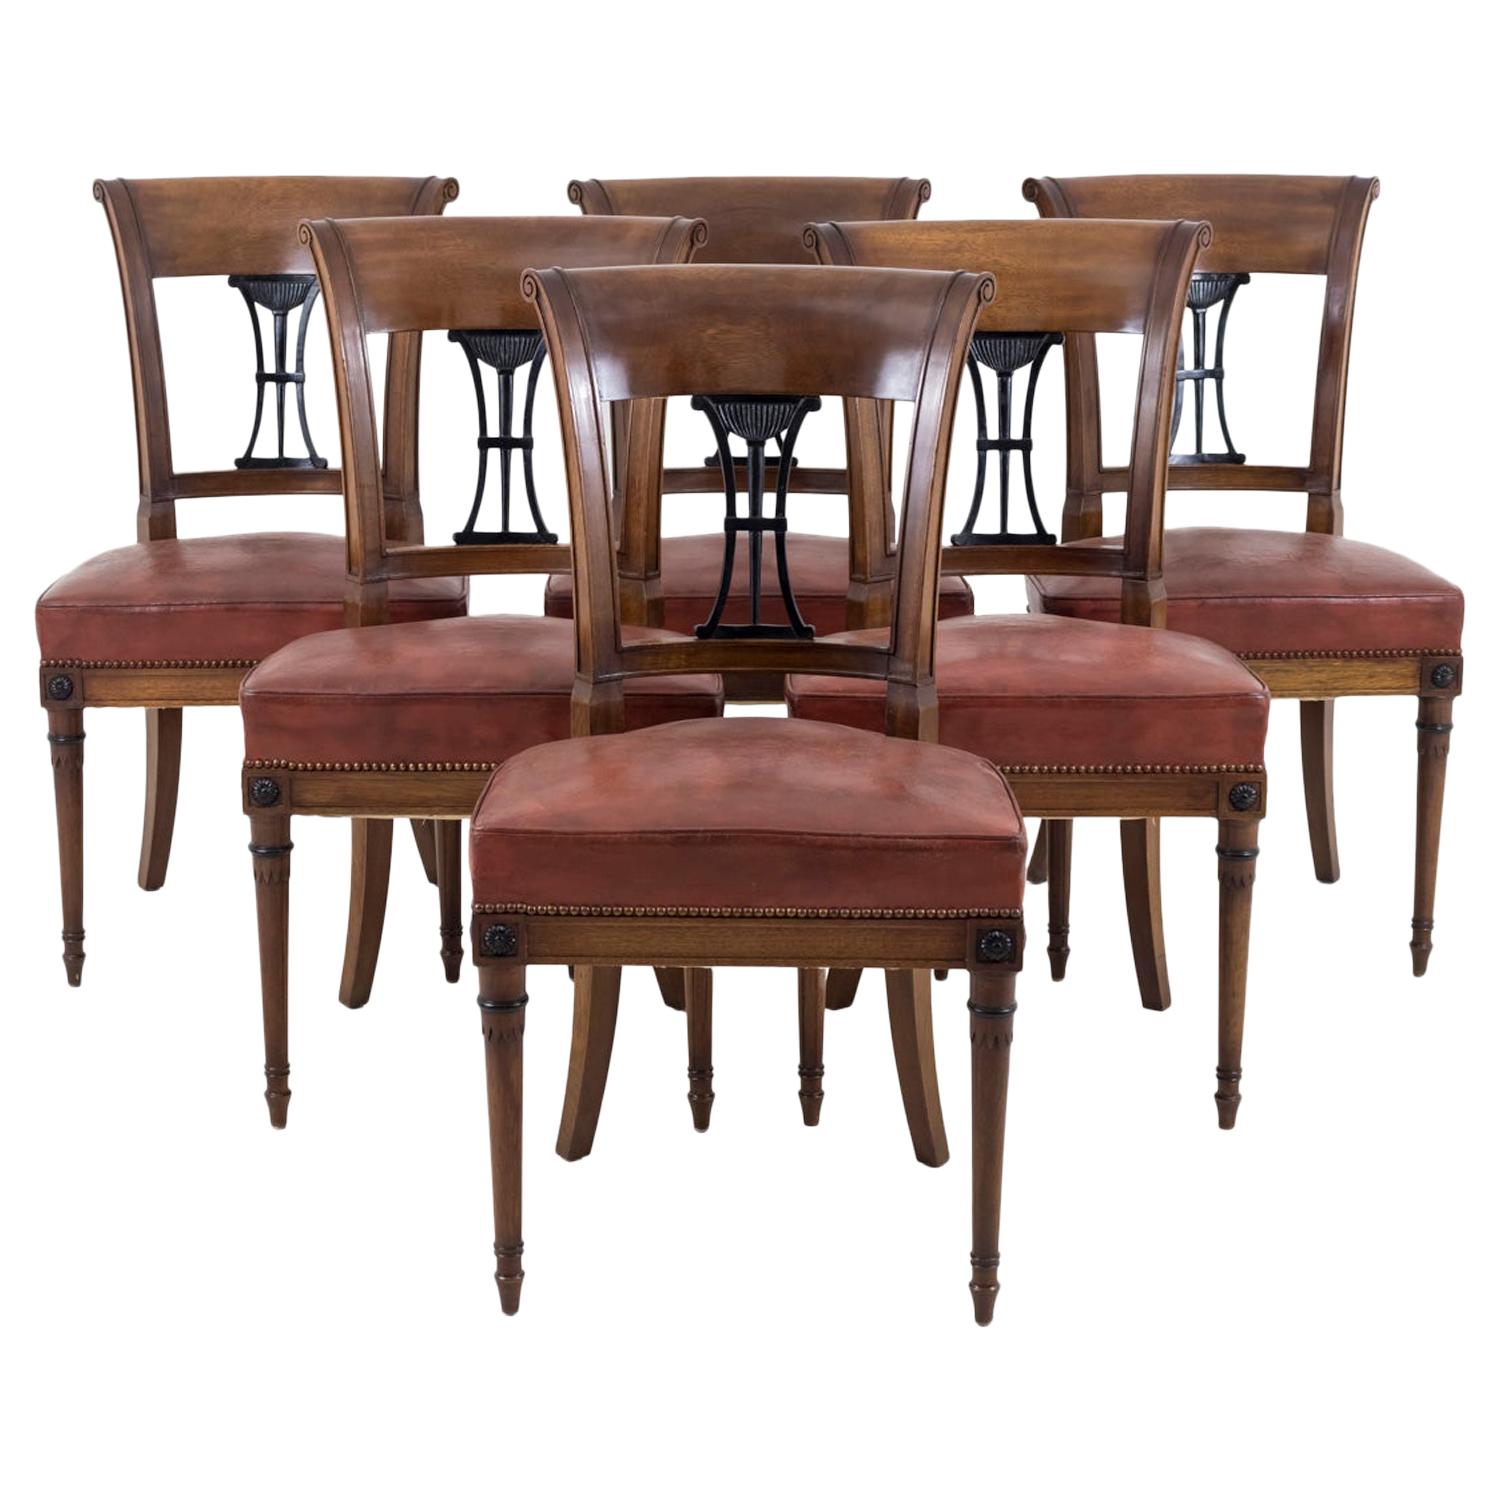 Set of 6 Directoire Style Chairs in Mahogany, Early 20th Century